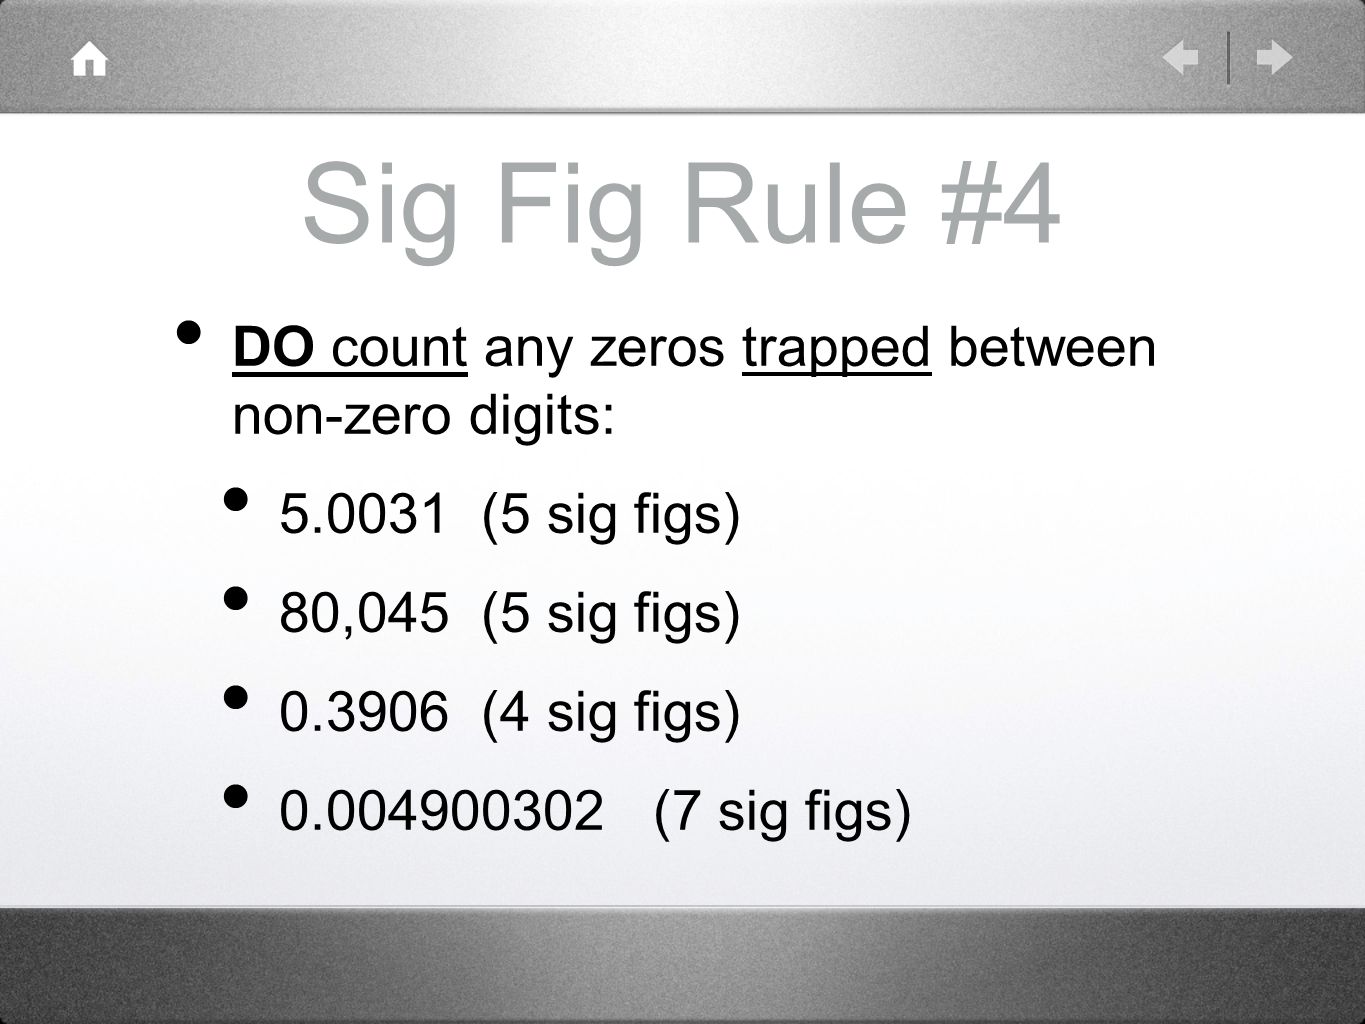 Sig Fig Rule #4 DO count any zeros trapped between non-zero digits: (5 sig figs) 80,045 (5 sig figs) (4 sig figs) (7 sig figs)